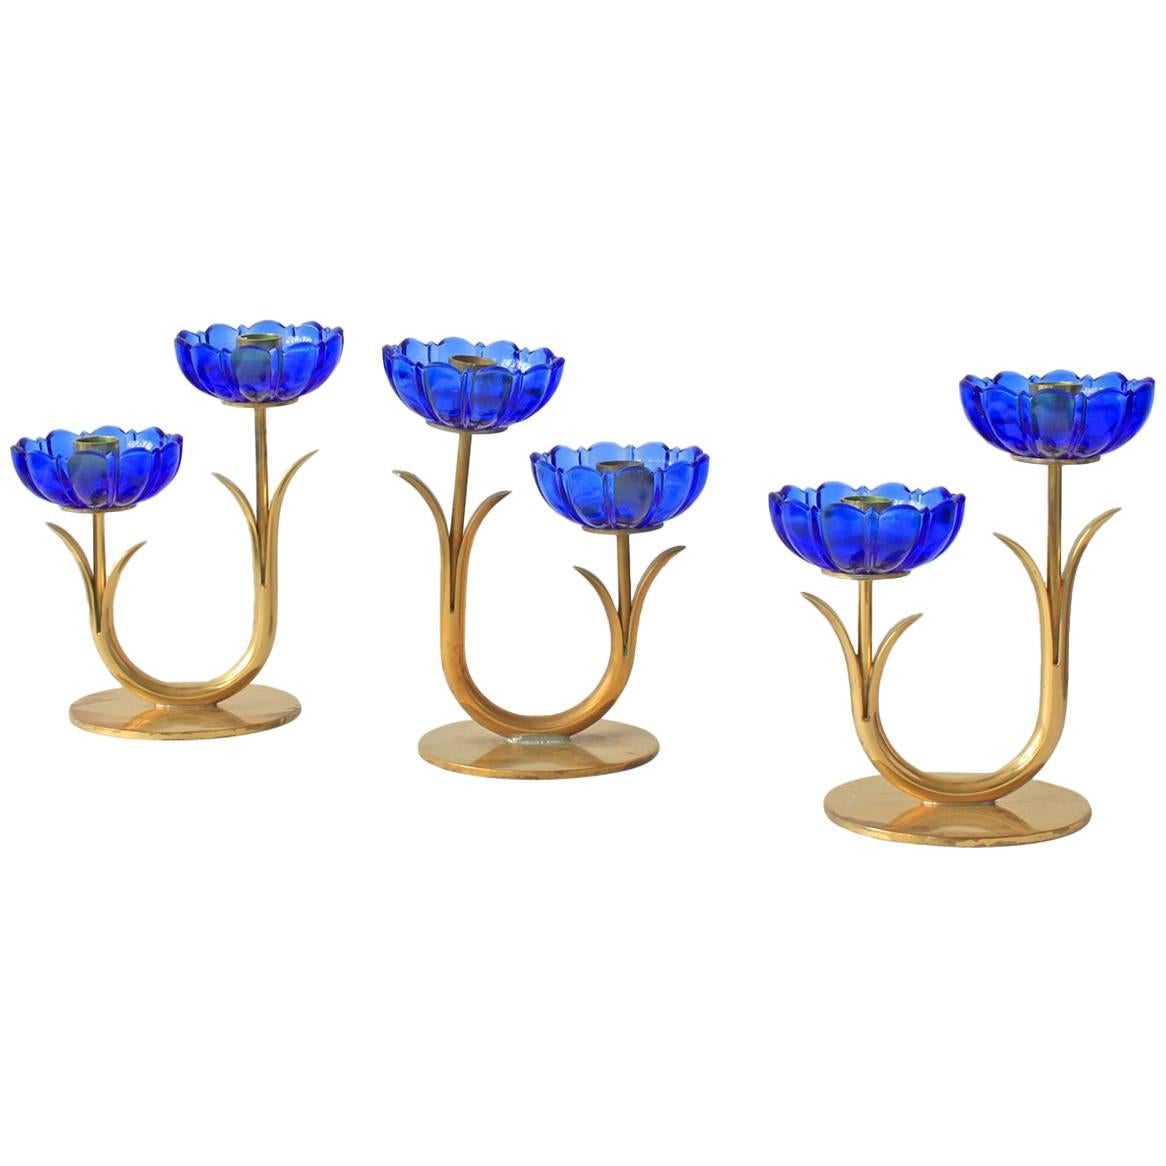 Delicate Gunnar Ander Flower Candleholders For Sale